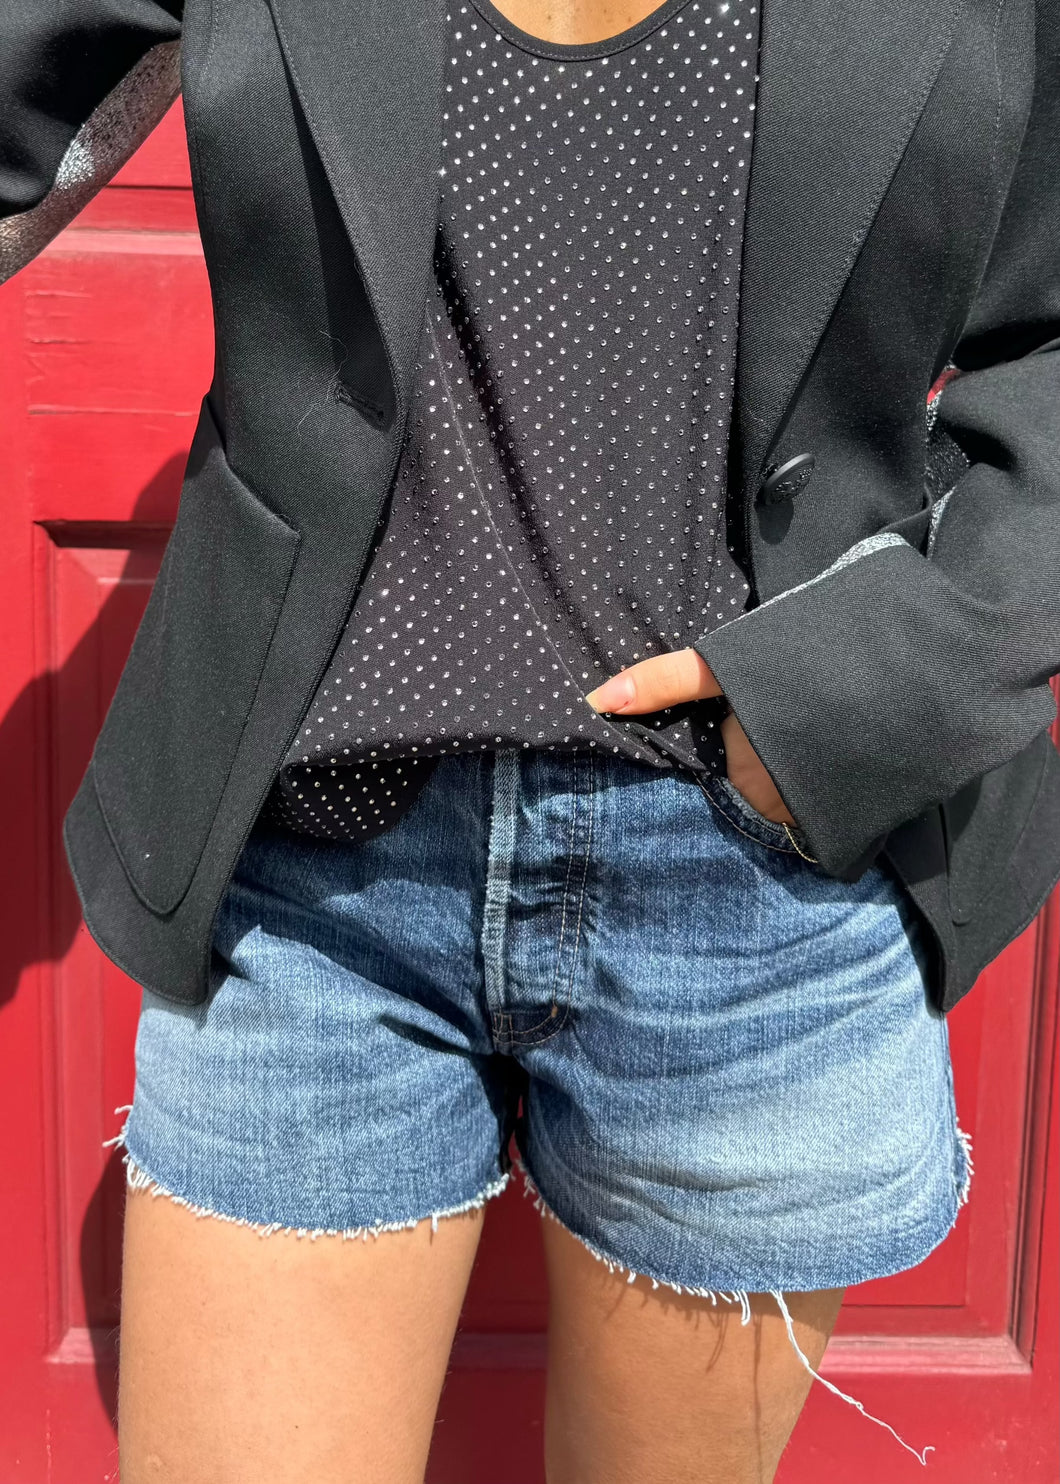 Moussy Denim Shorts, available at west2westport.com